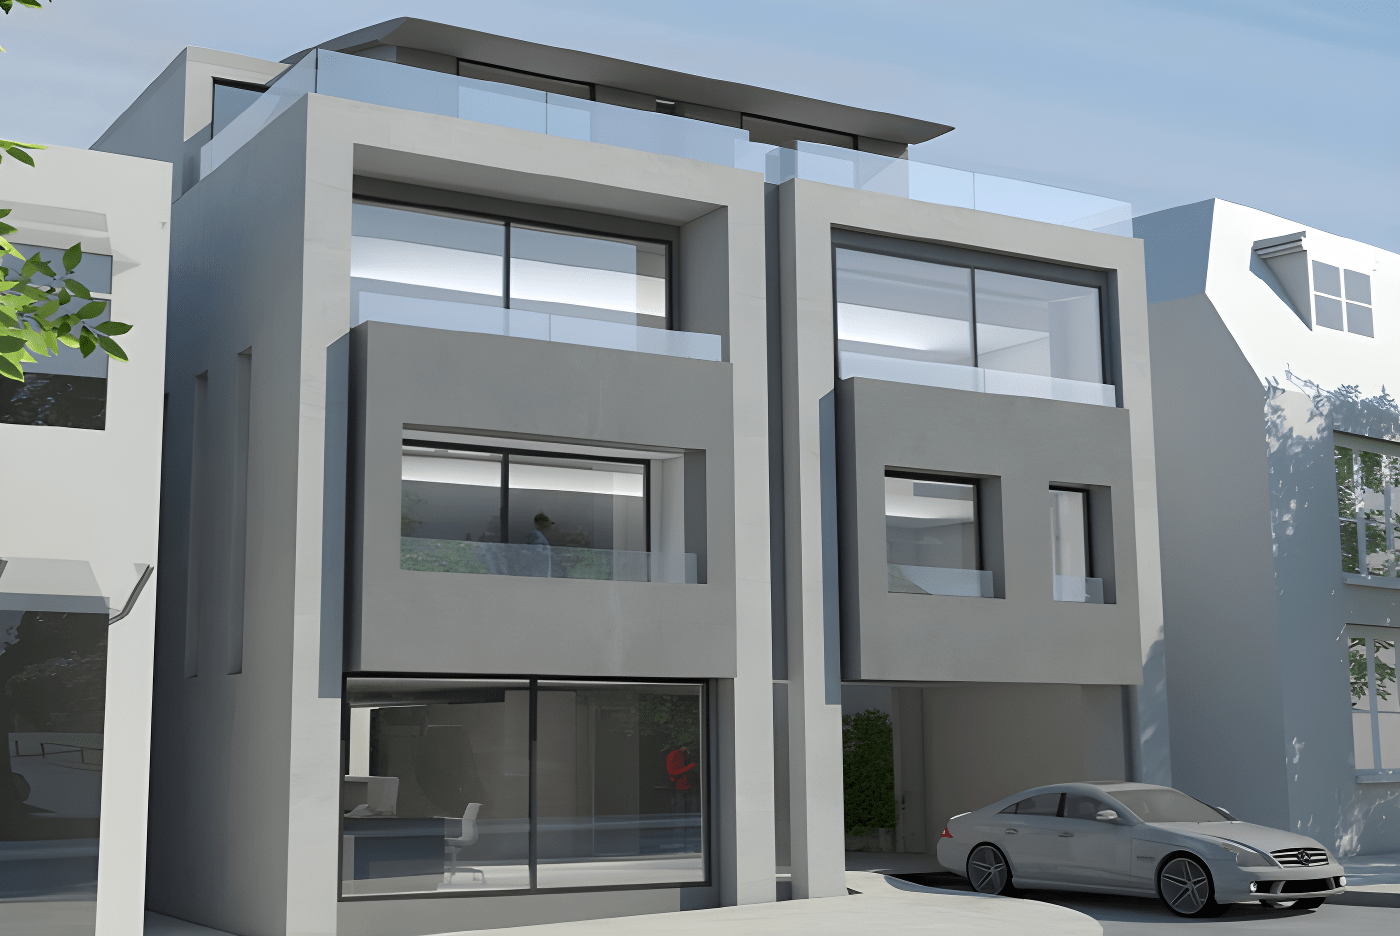 Seven Apartments and Two Offices for Whetstone